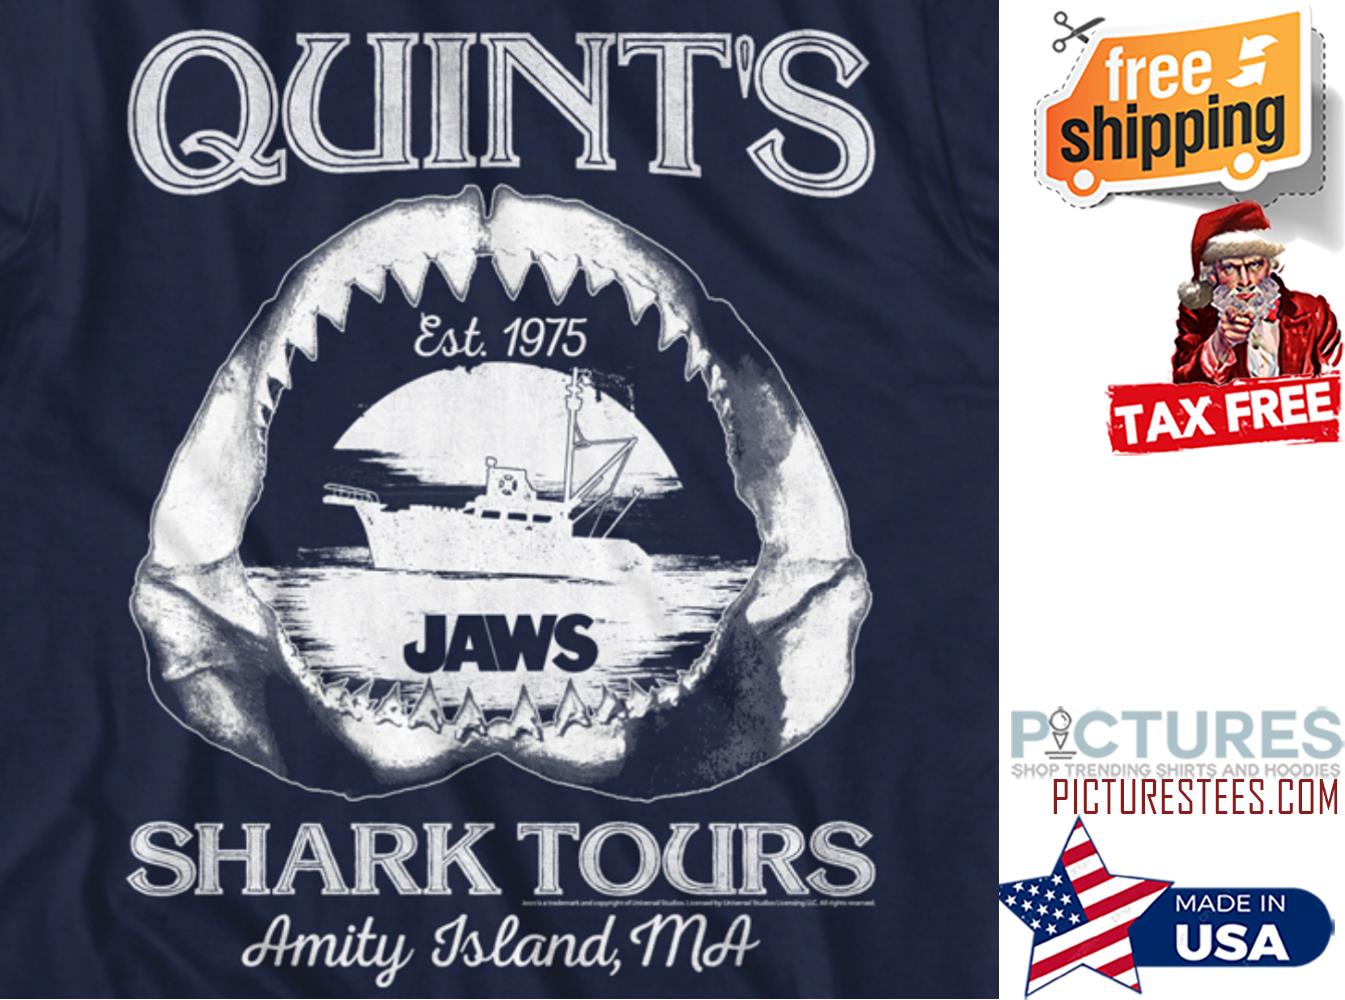 FREE shipping Quint's EST 1978 Jaws shark tours amity island MA shirt, Unisex sweater, v-neck and tank top